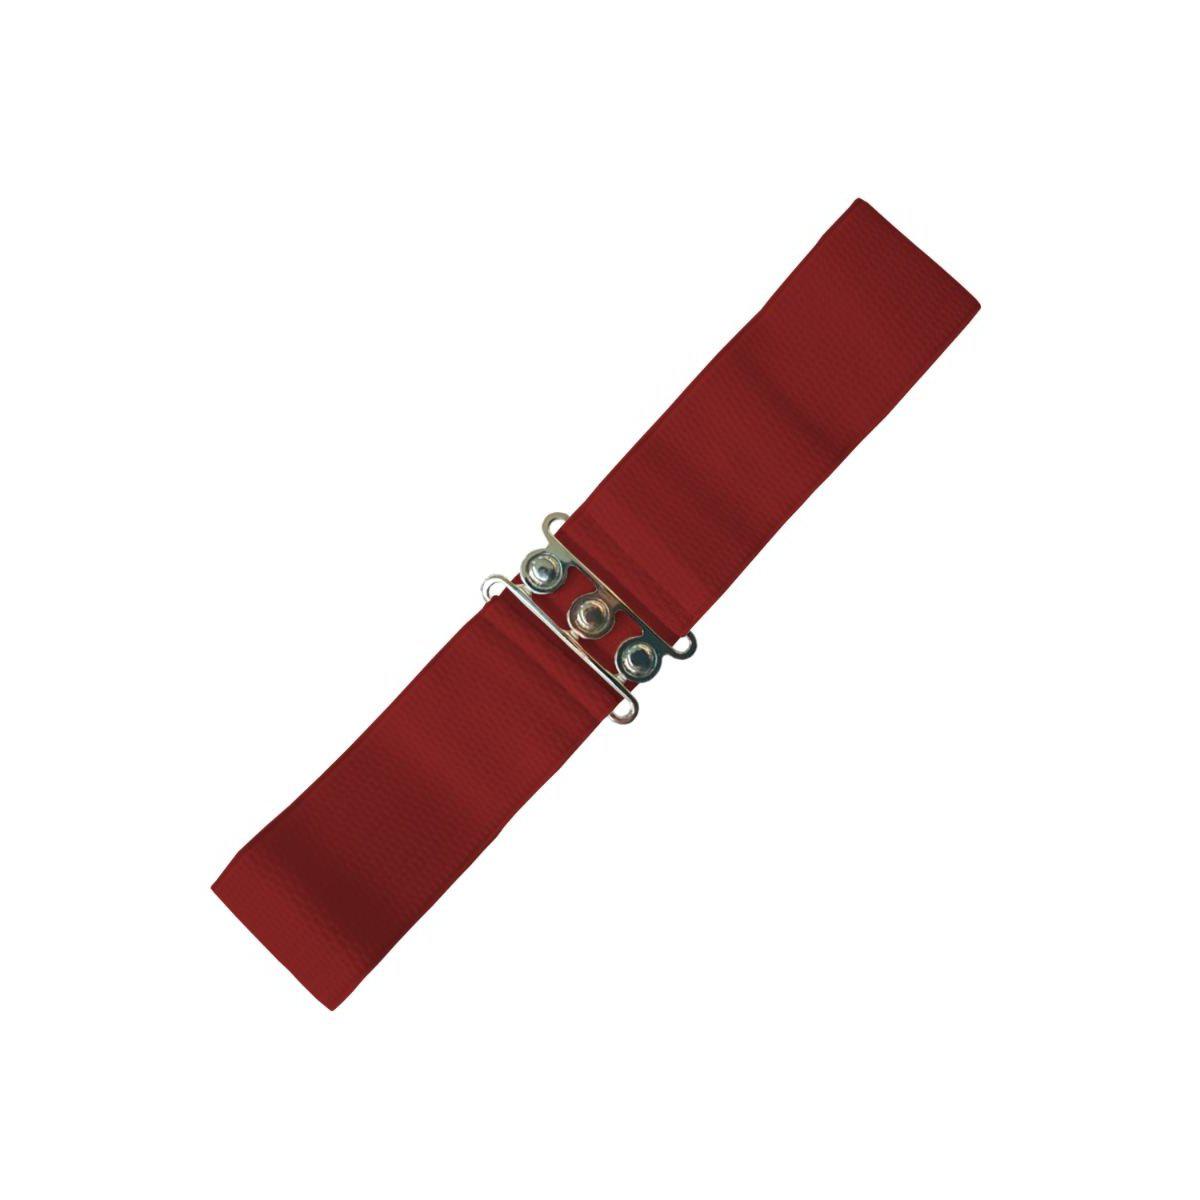 Red Galactic P Belt (The belt is adjustable from 28-42